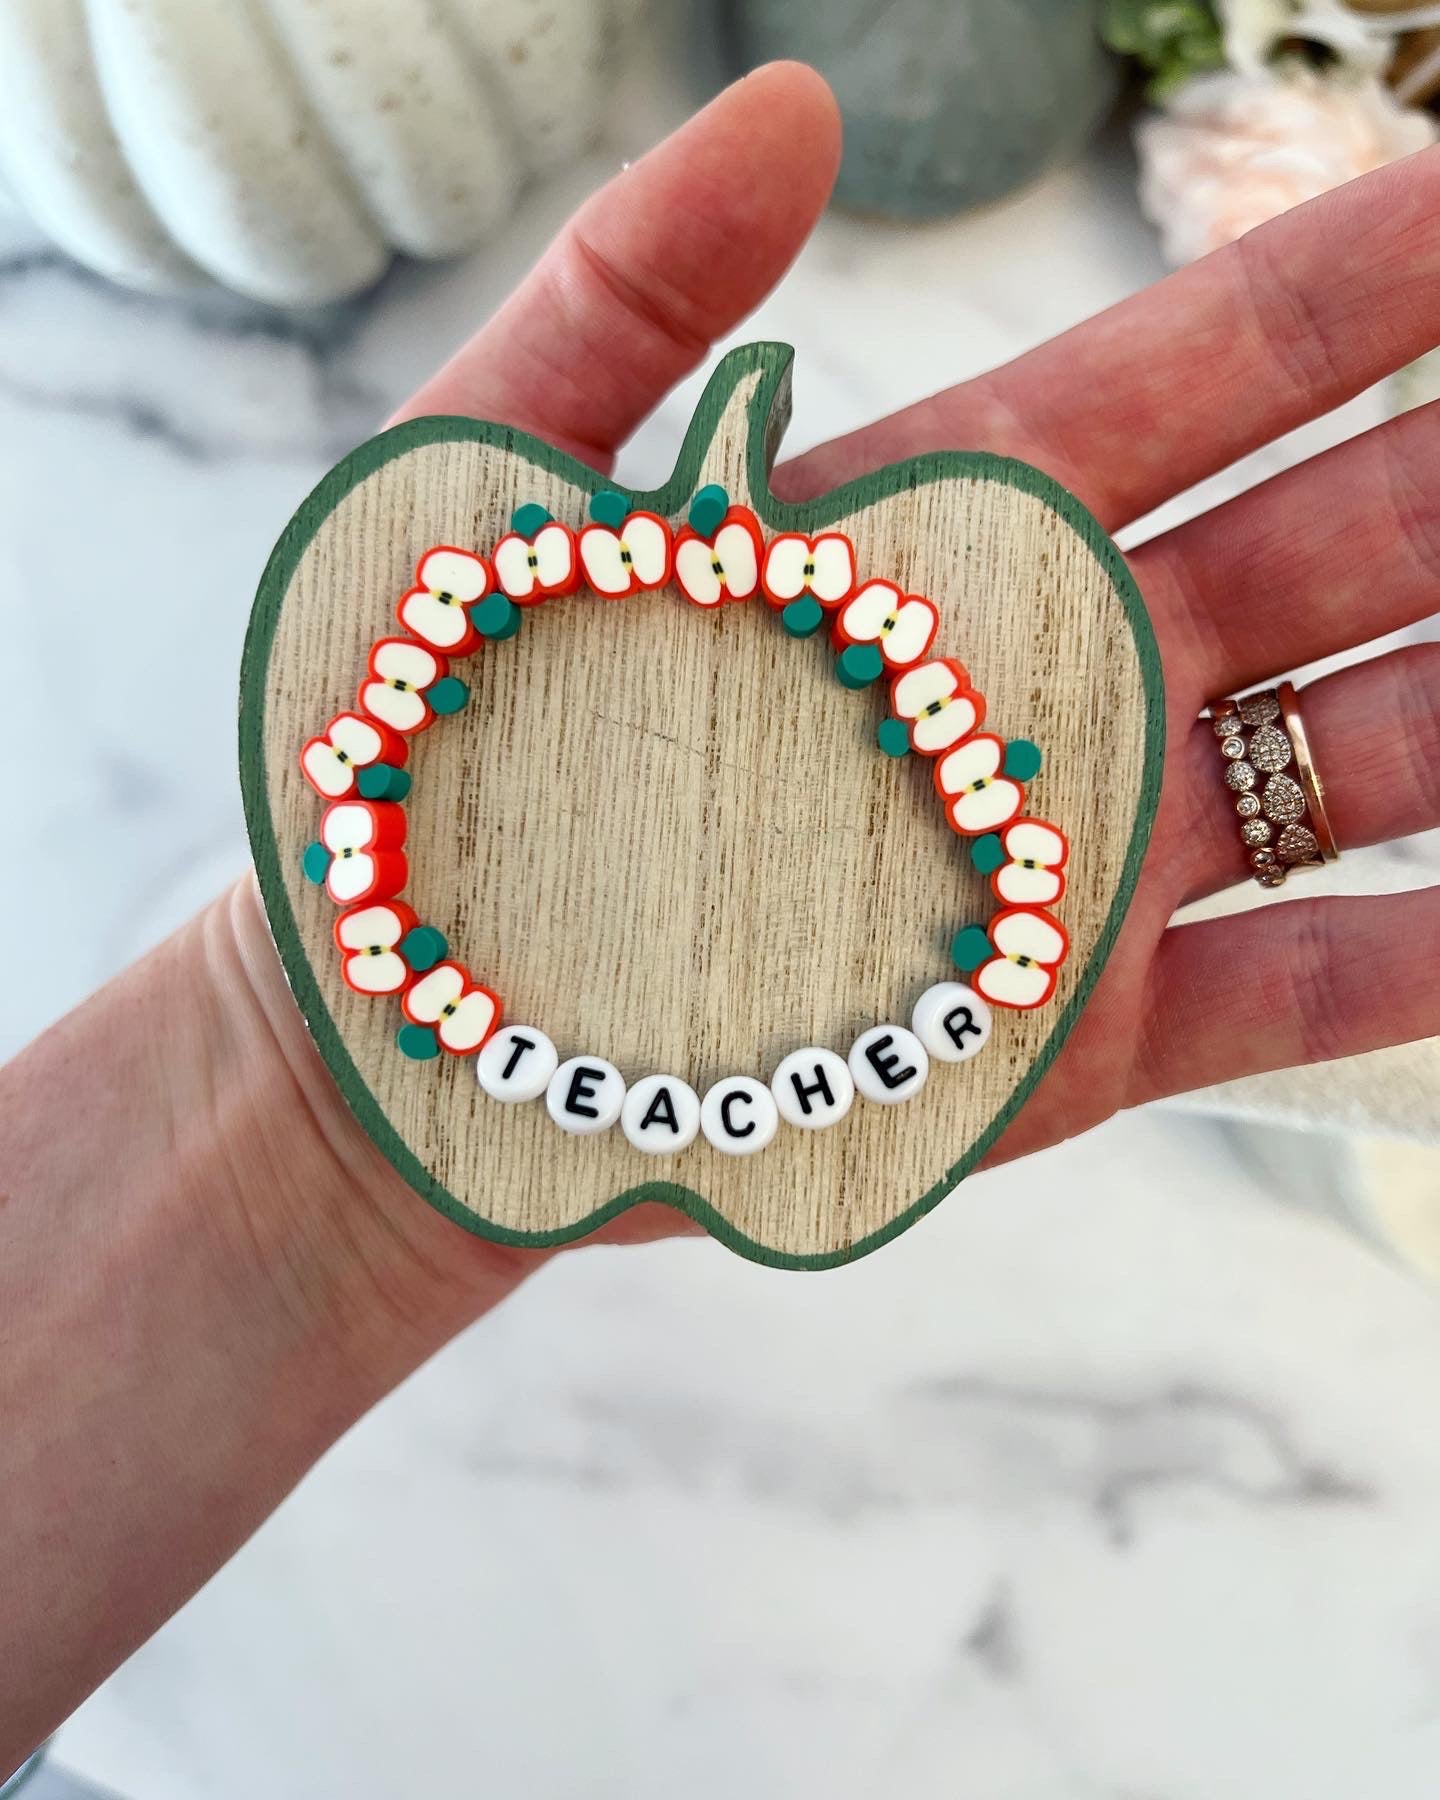 Halloween Teacher Apple Bracelet! Personalized Halloween gift tag included with box and ribbon! Teacher thank you gift!